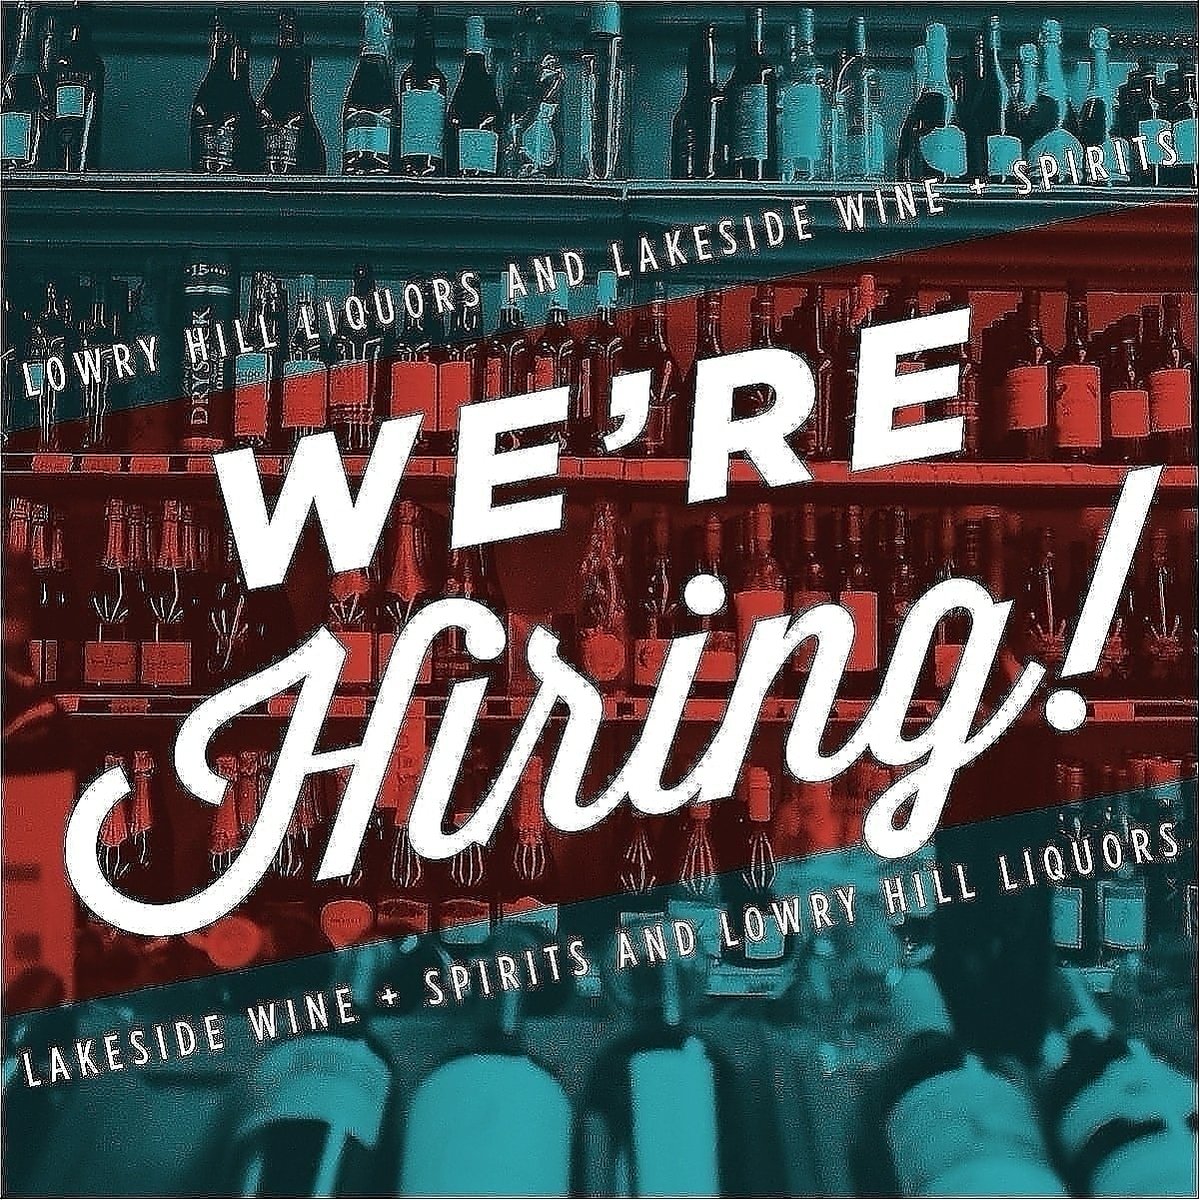 Email your resume to cortney@lhlwine.com or fill out an application in-store. #Minneapolis #UptownMpls #LowryHill #HiringMN #JobsinMN